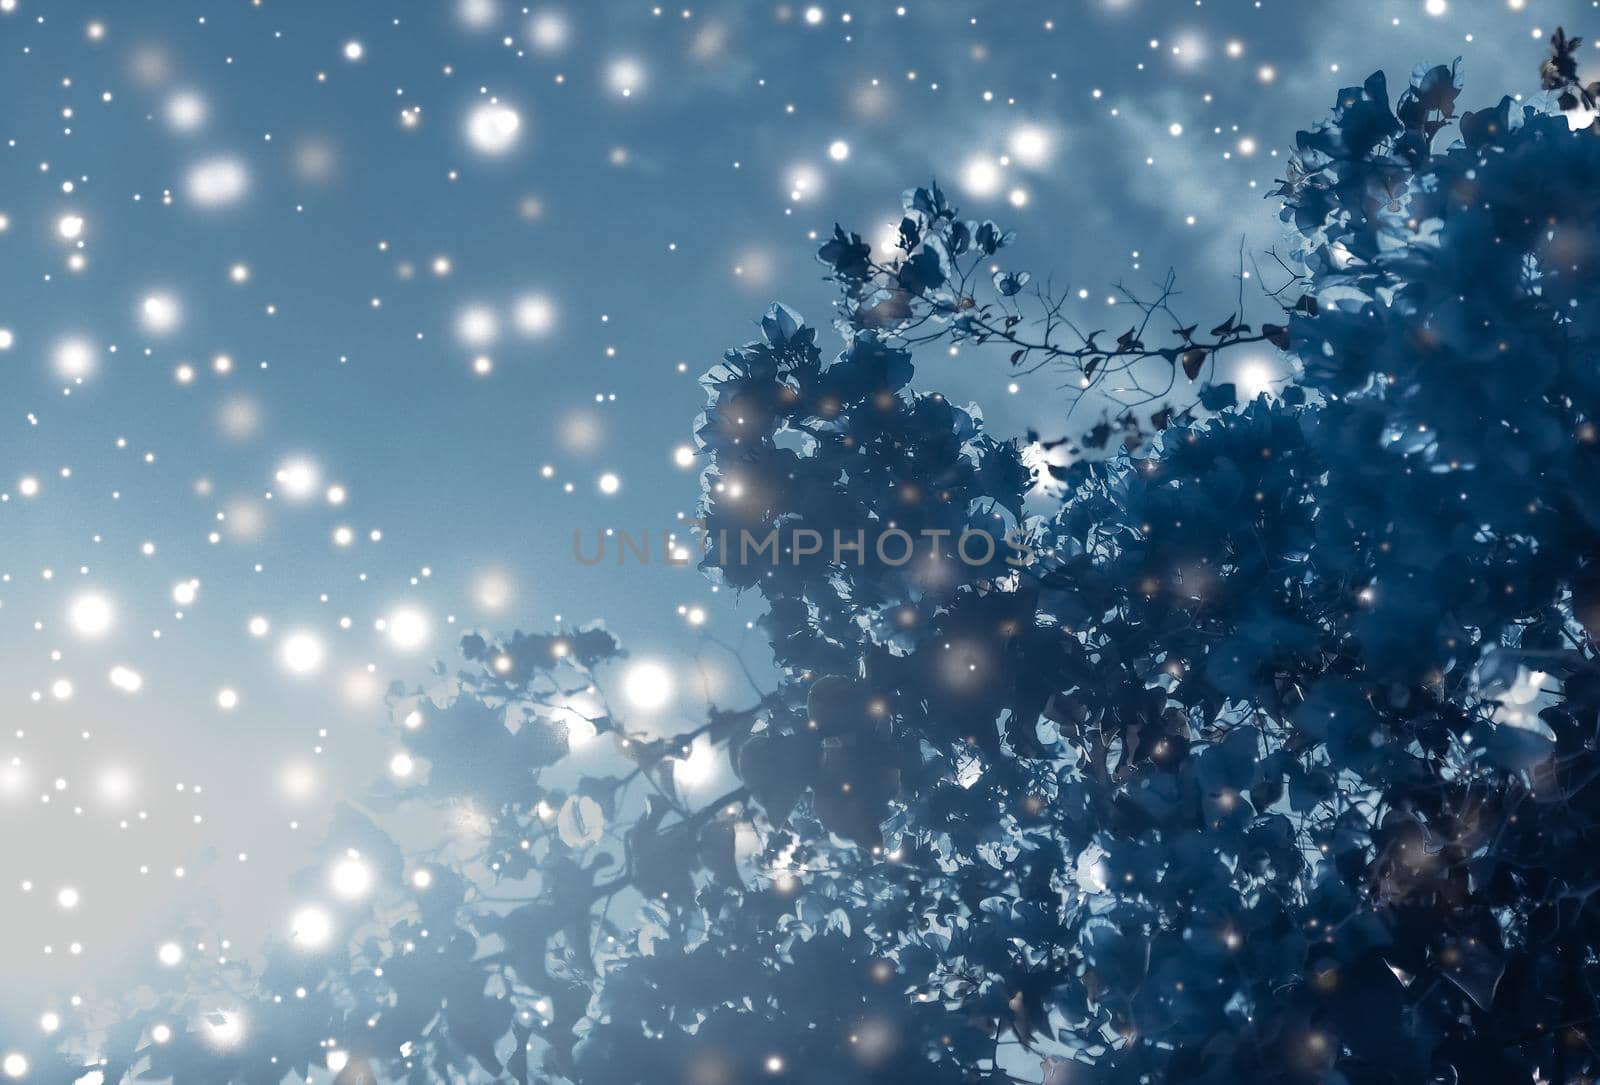 Magical, branding and festive concept - Christmas, New Years blue floral nature background, holiday card design, flower tree and snow glitter as winter season sale backdrop for luxury beauty brand